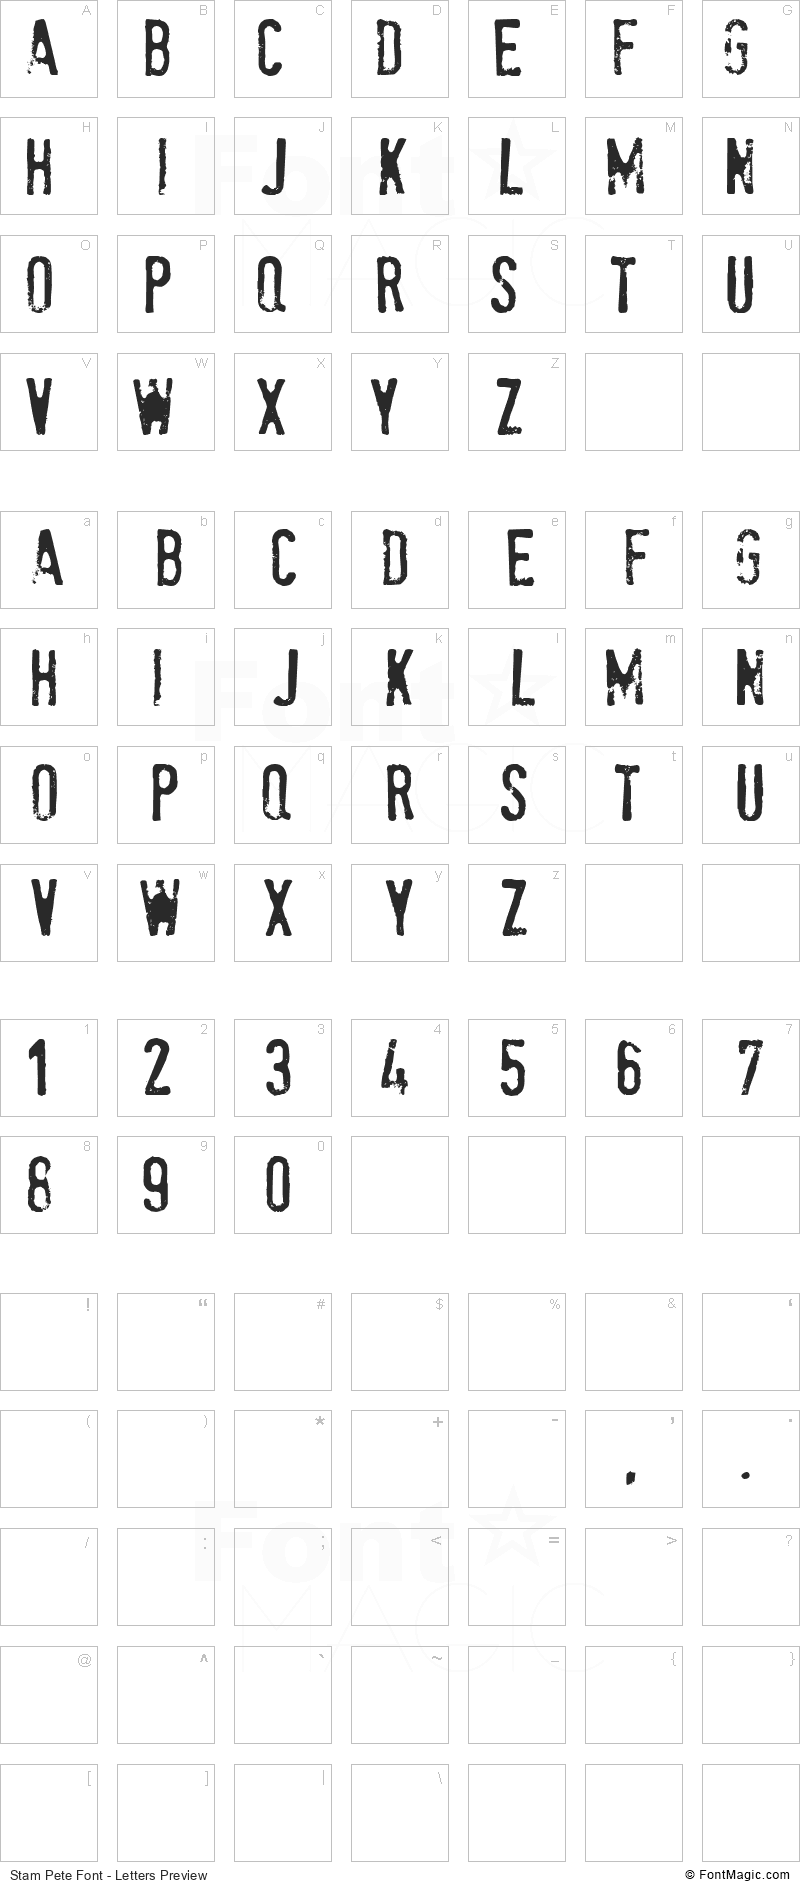 Stam Pete Font - All Latters Preview Chart